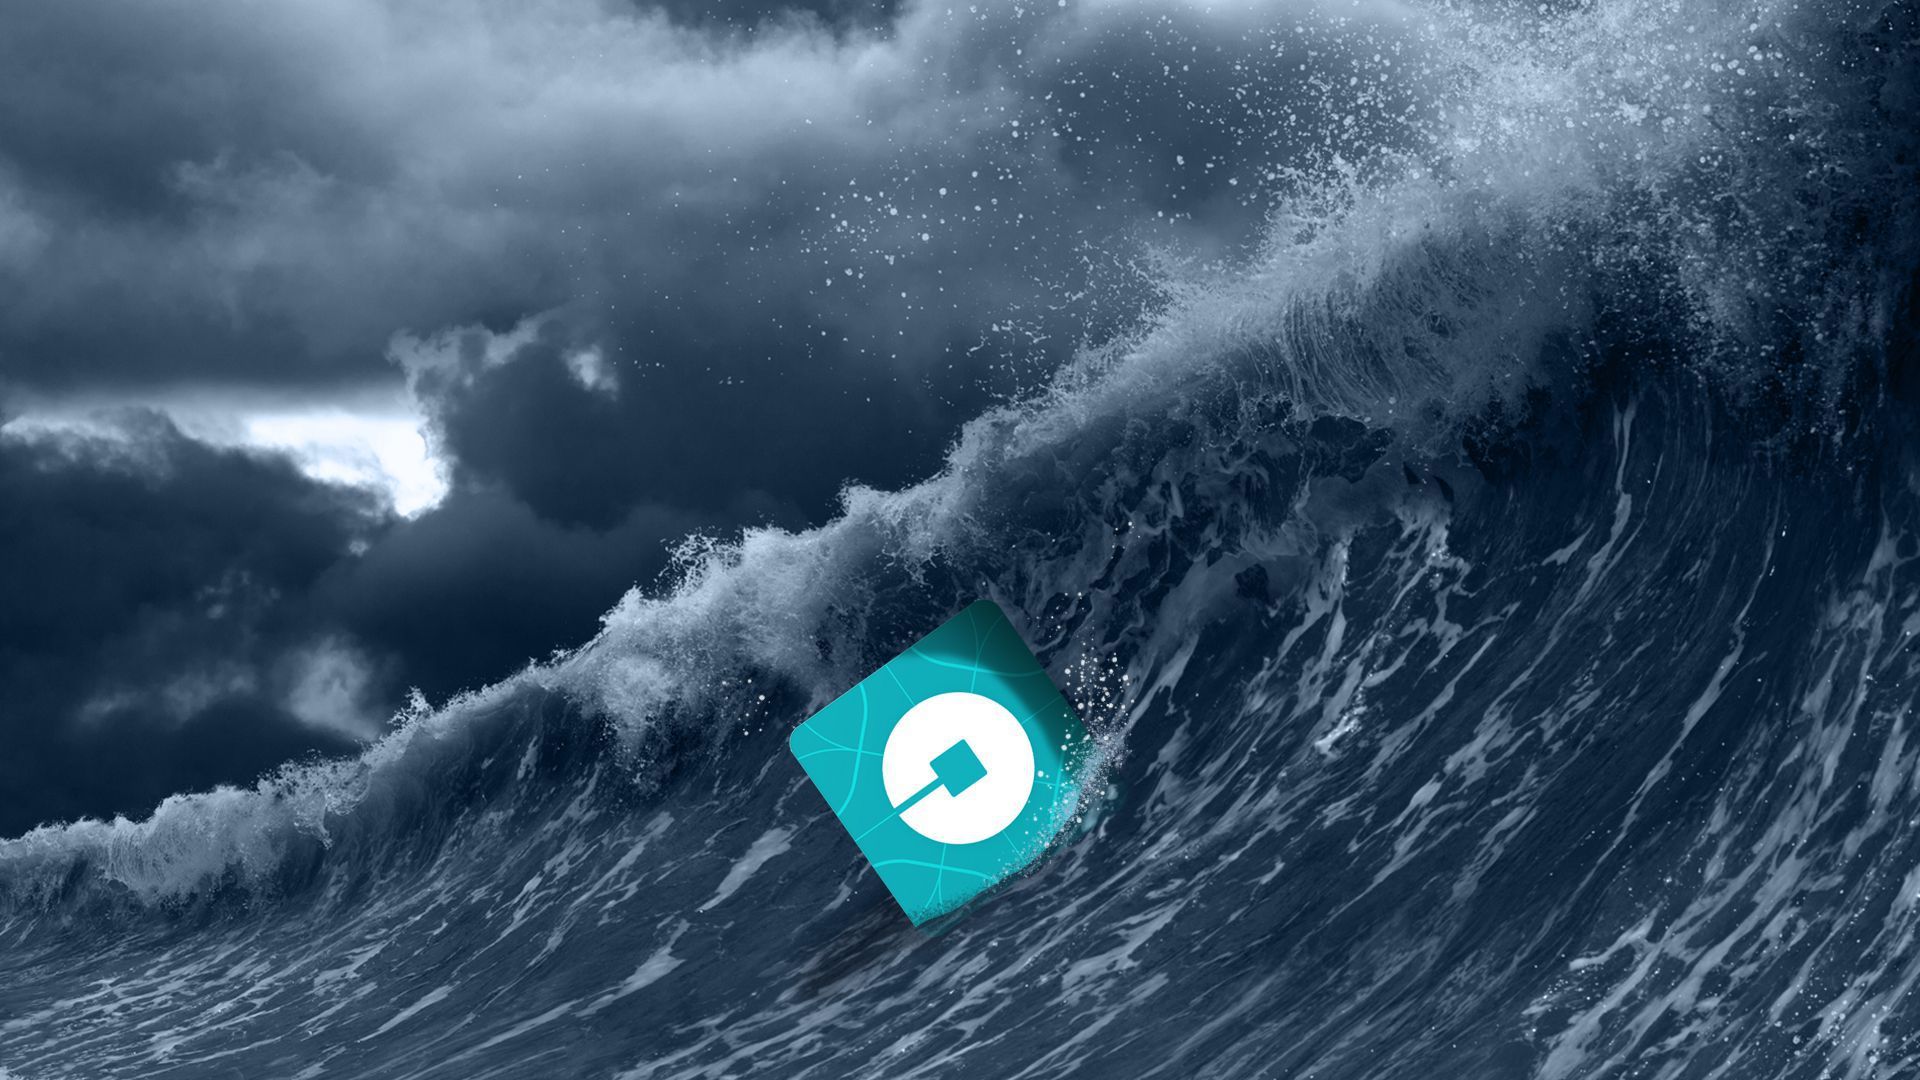 An Uber icon in a giant wave amid a storm